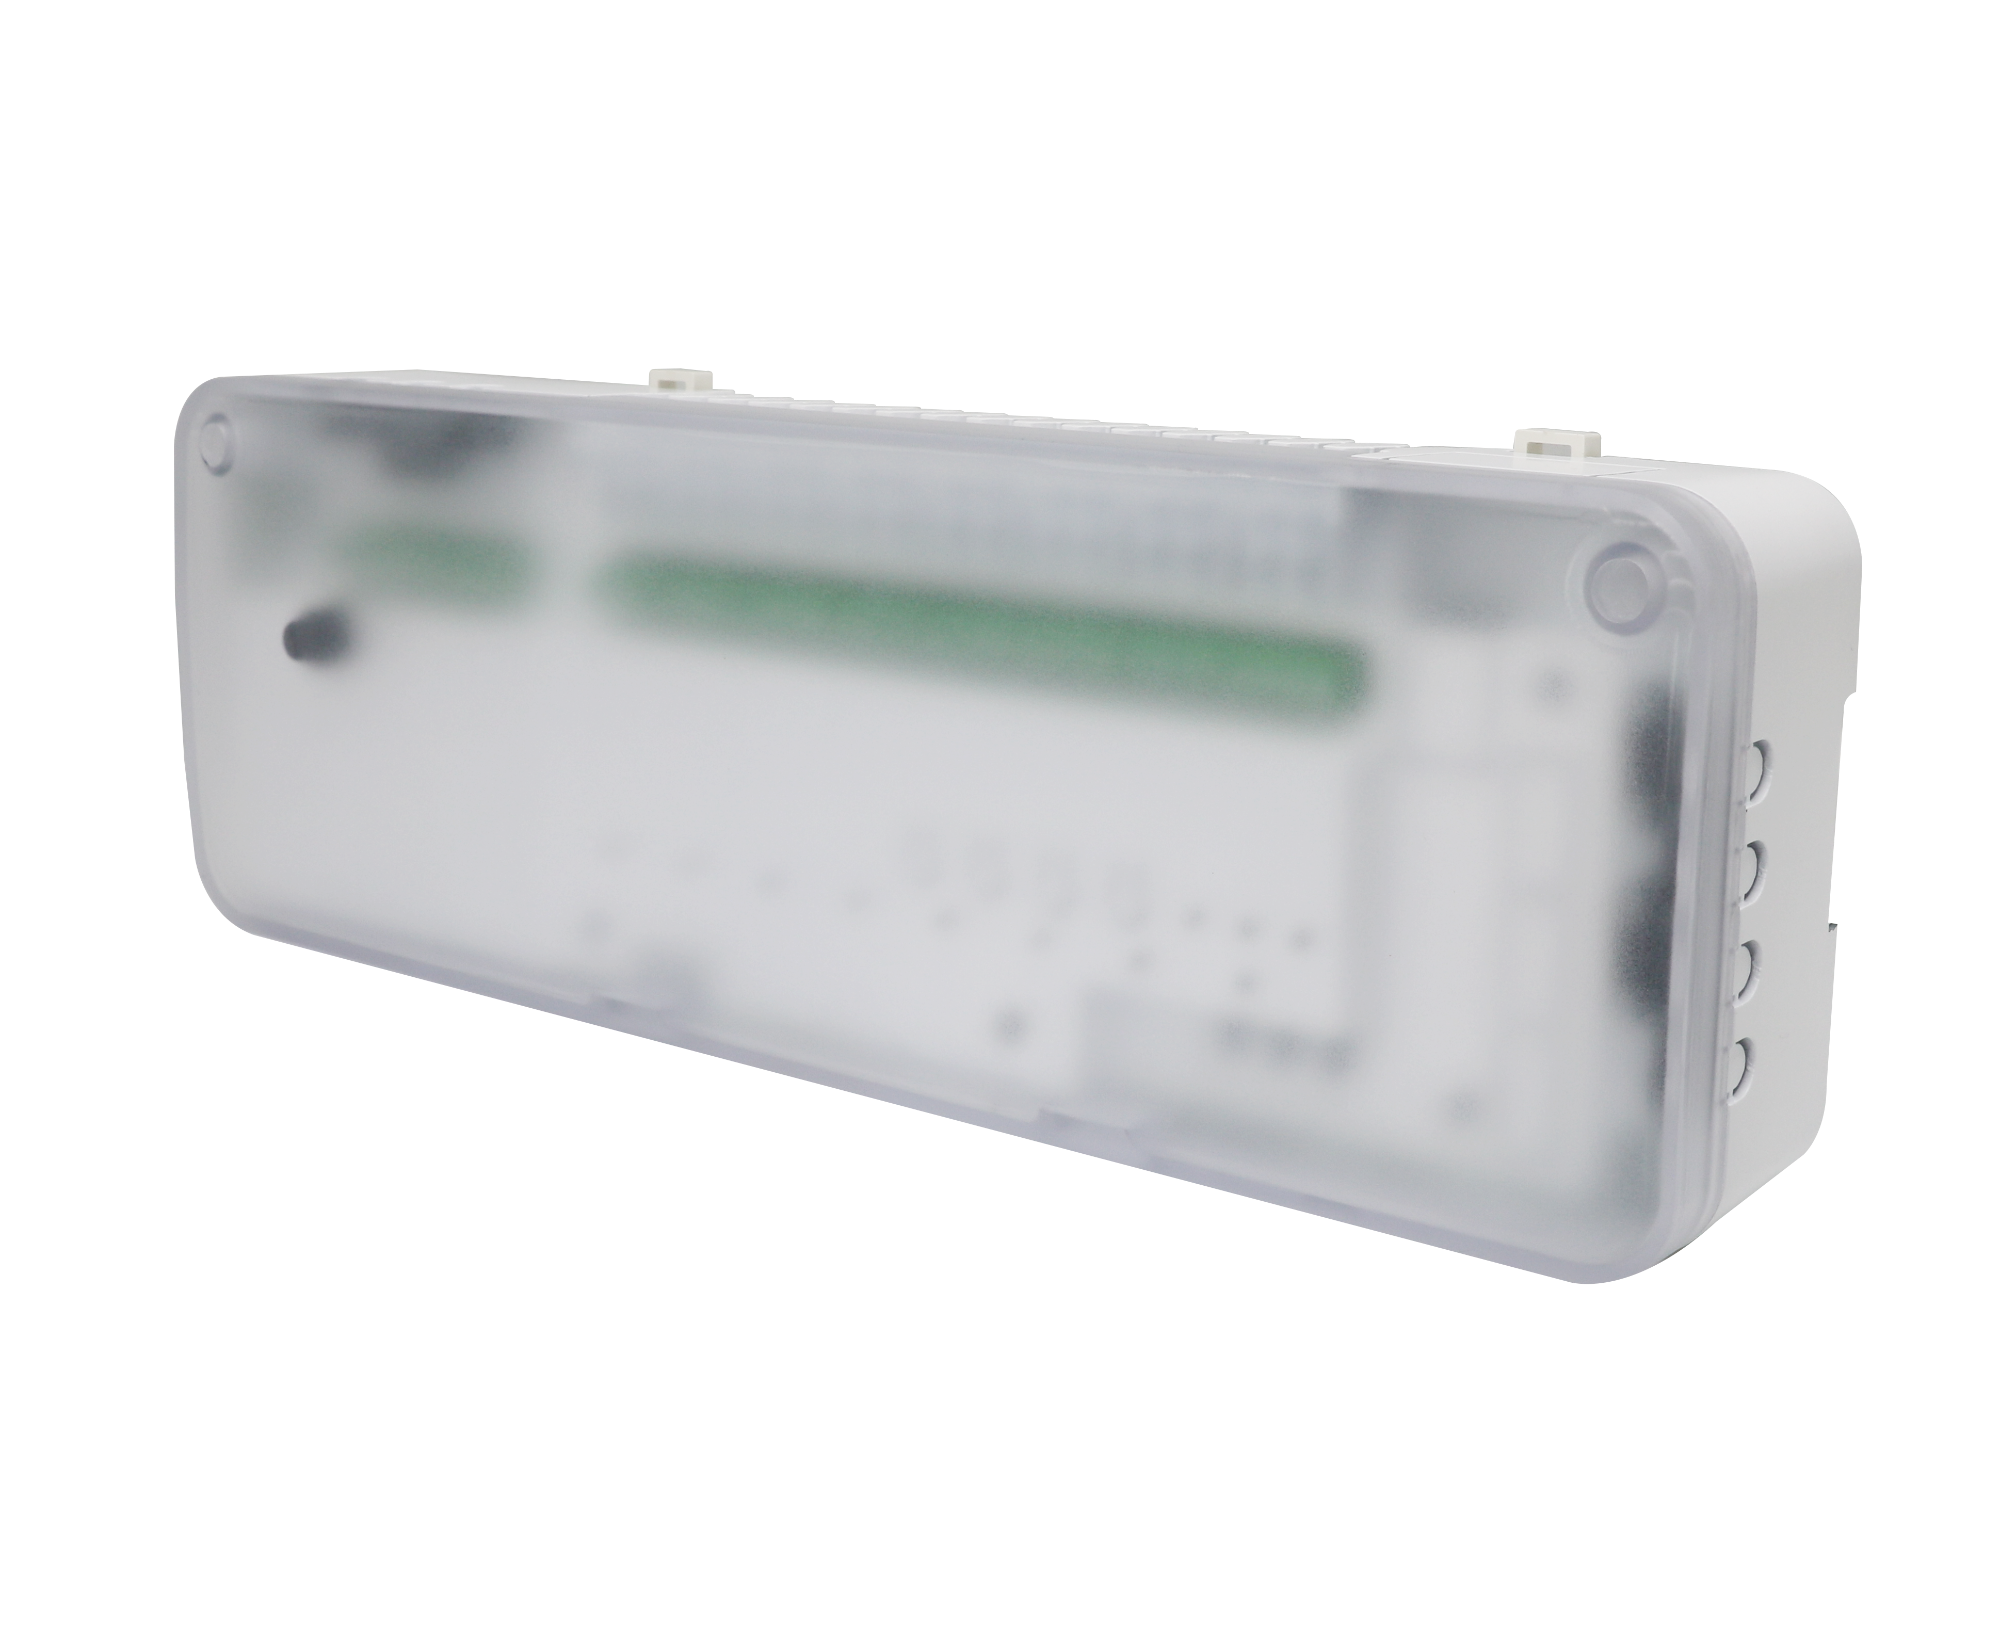 New Product Release - 16 zones central heating controller